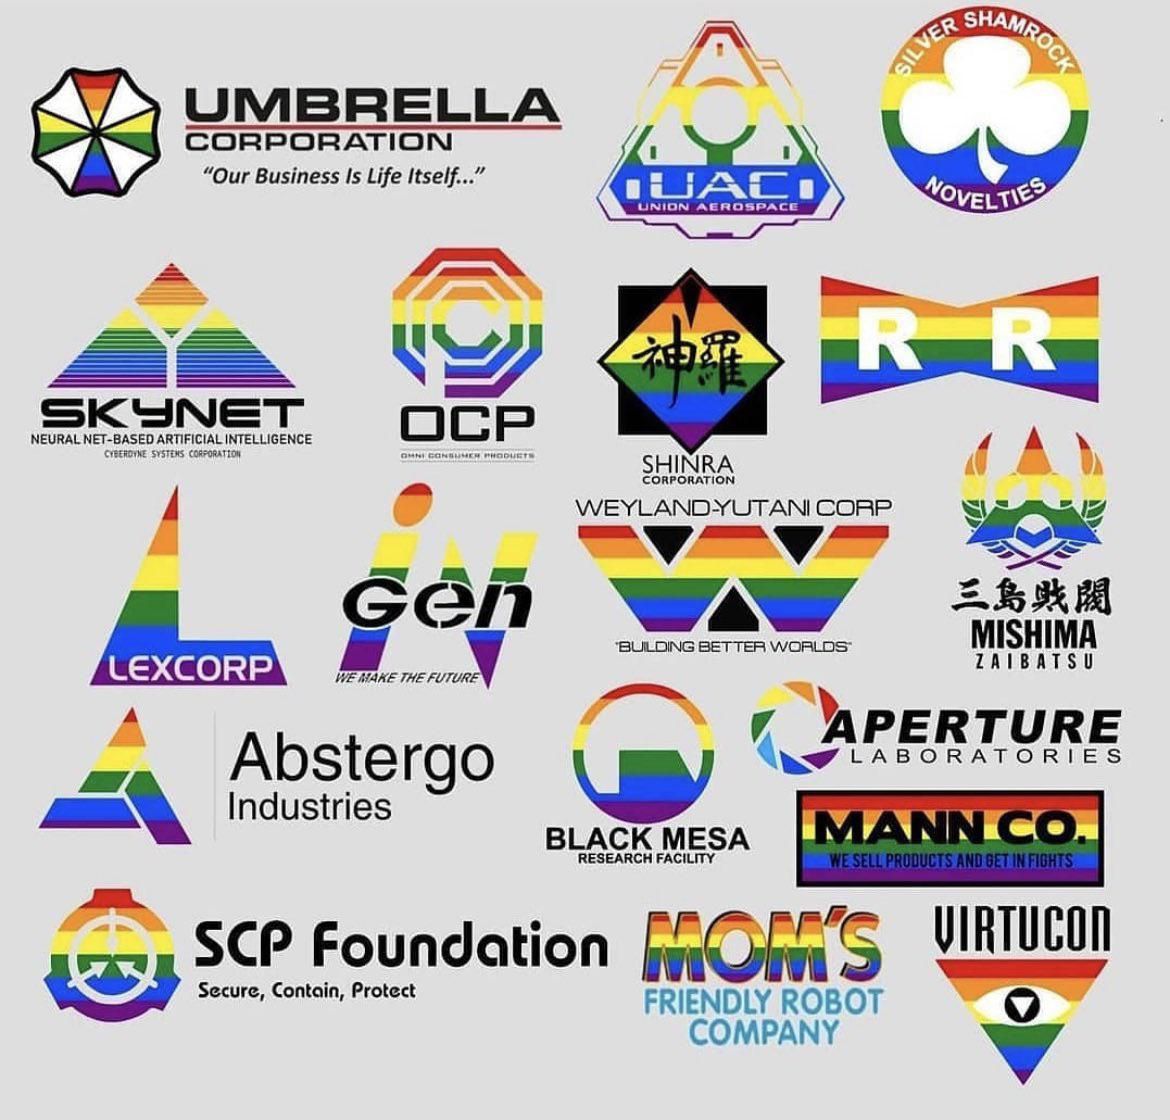 It’s nice to see so many companies embracing Pride Month.